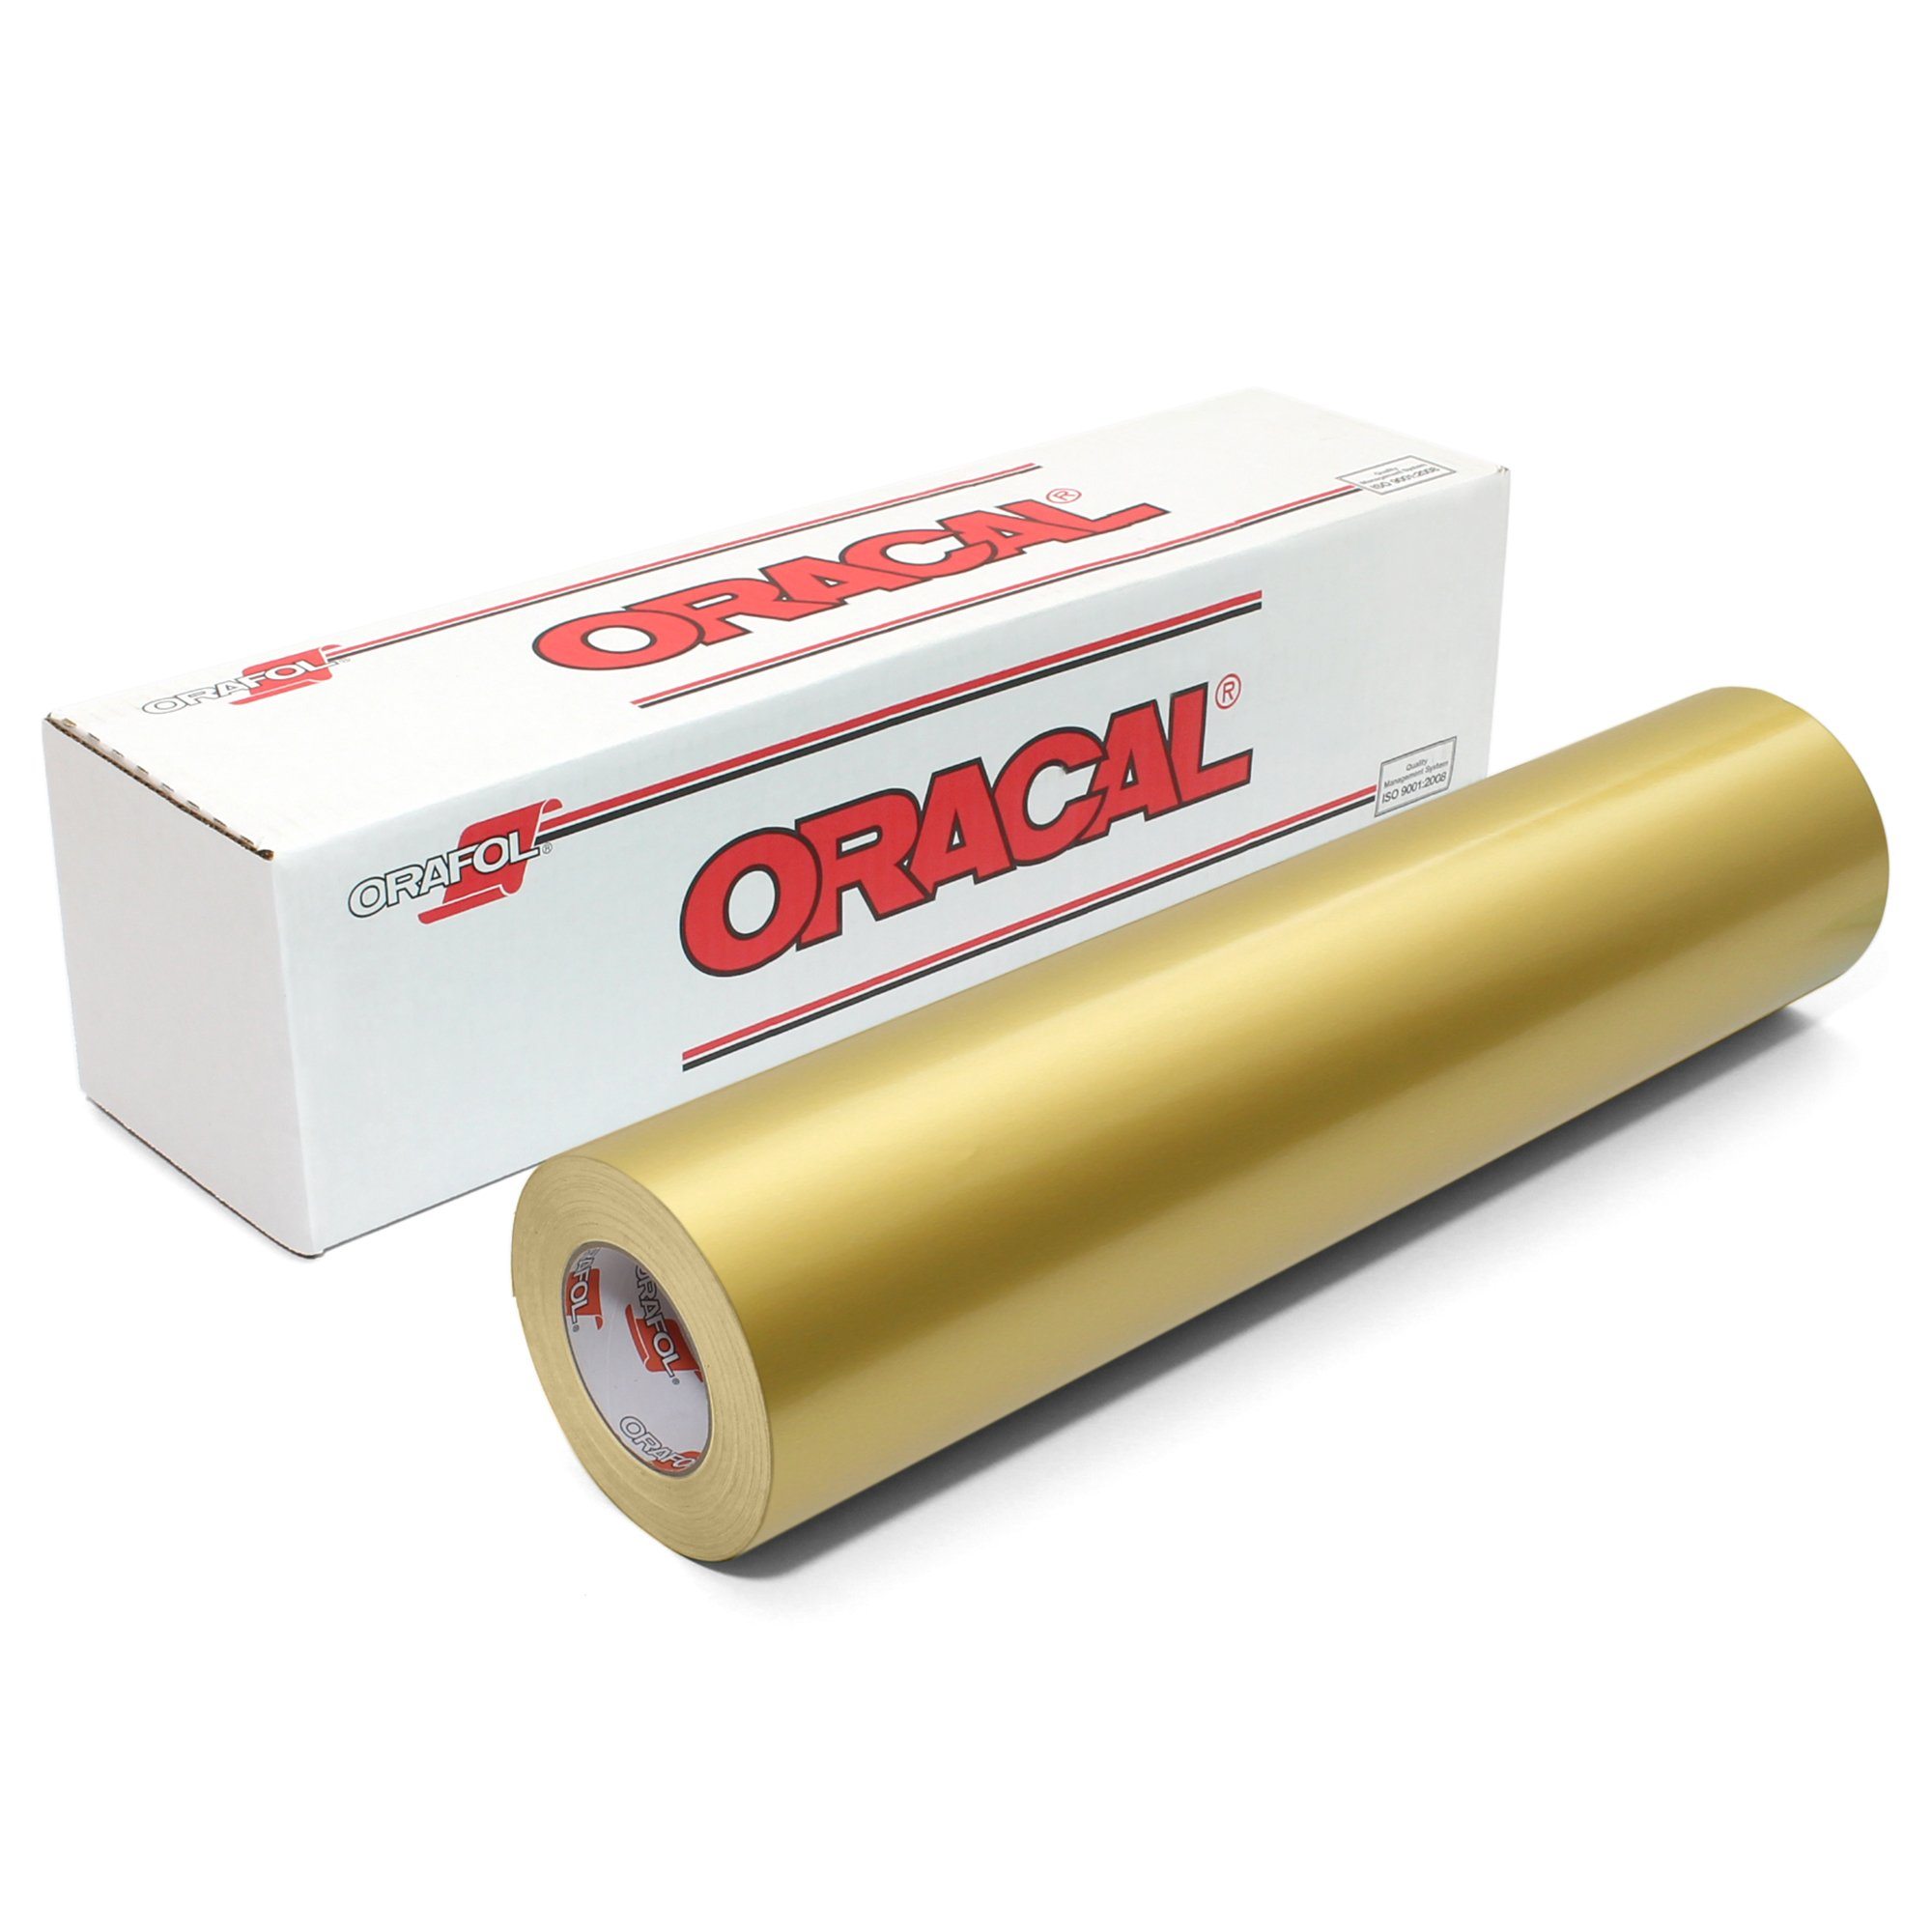  Oracal 651 Permanent Glossy Metallic Gold Adhesive Vinyl (12 x  25ft w/Detailer) : Arts, Crafts & Sewing